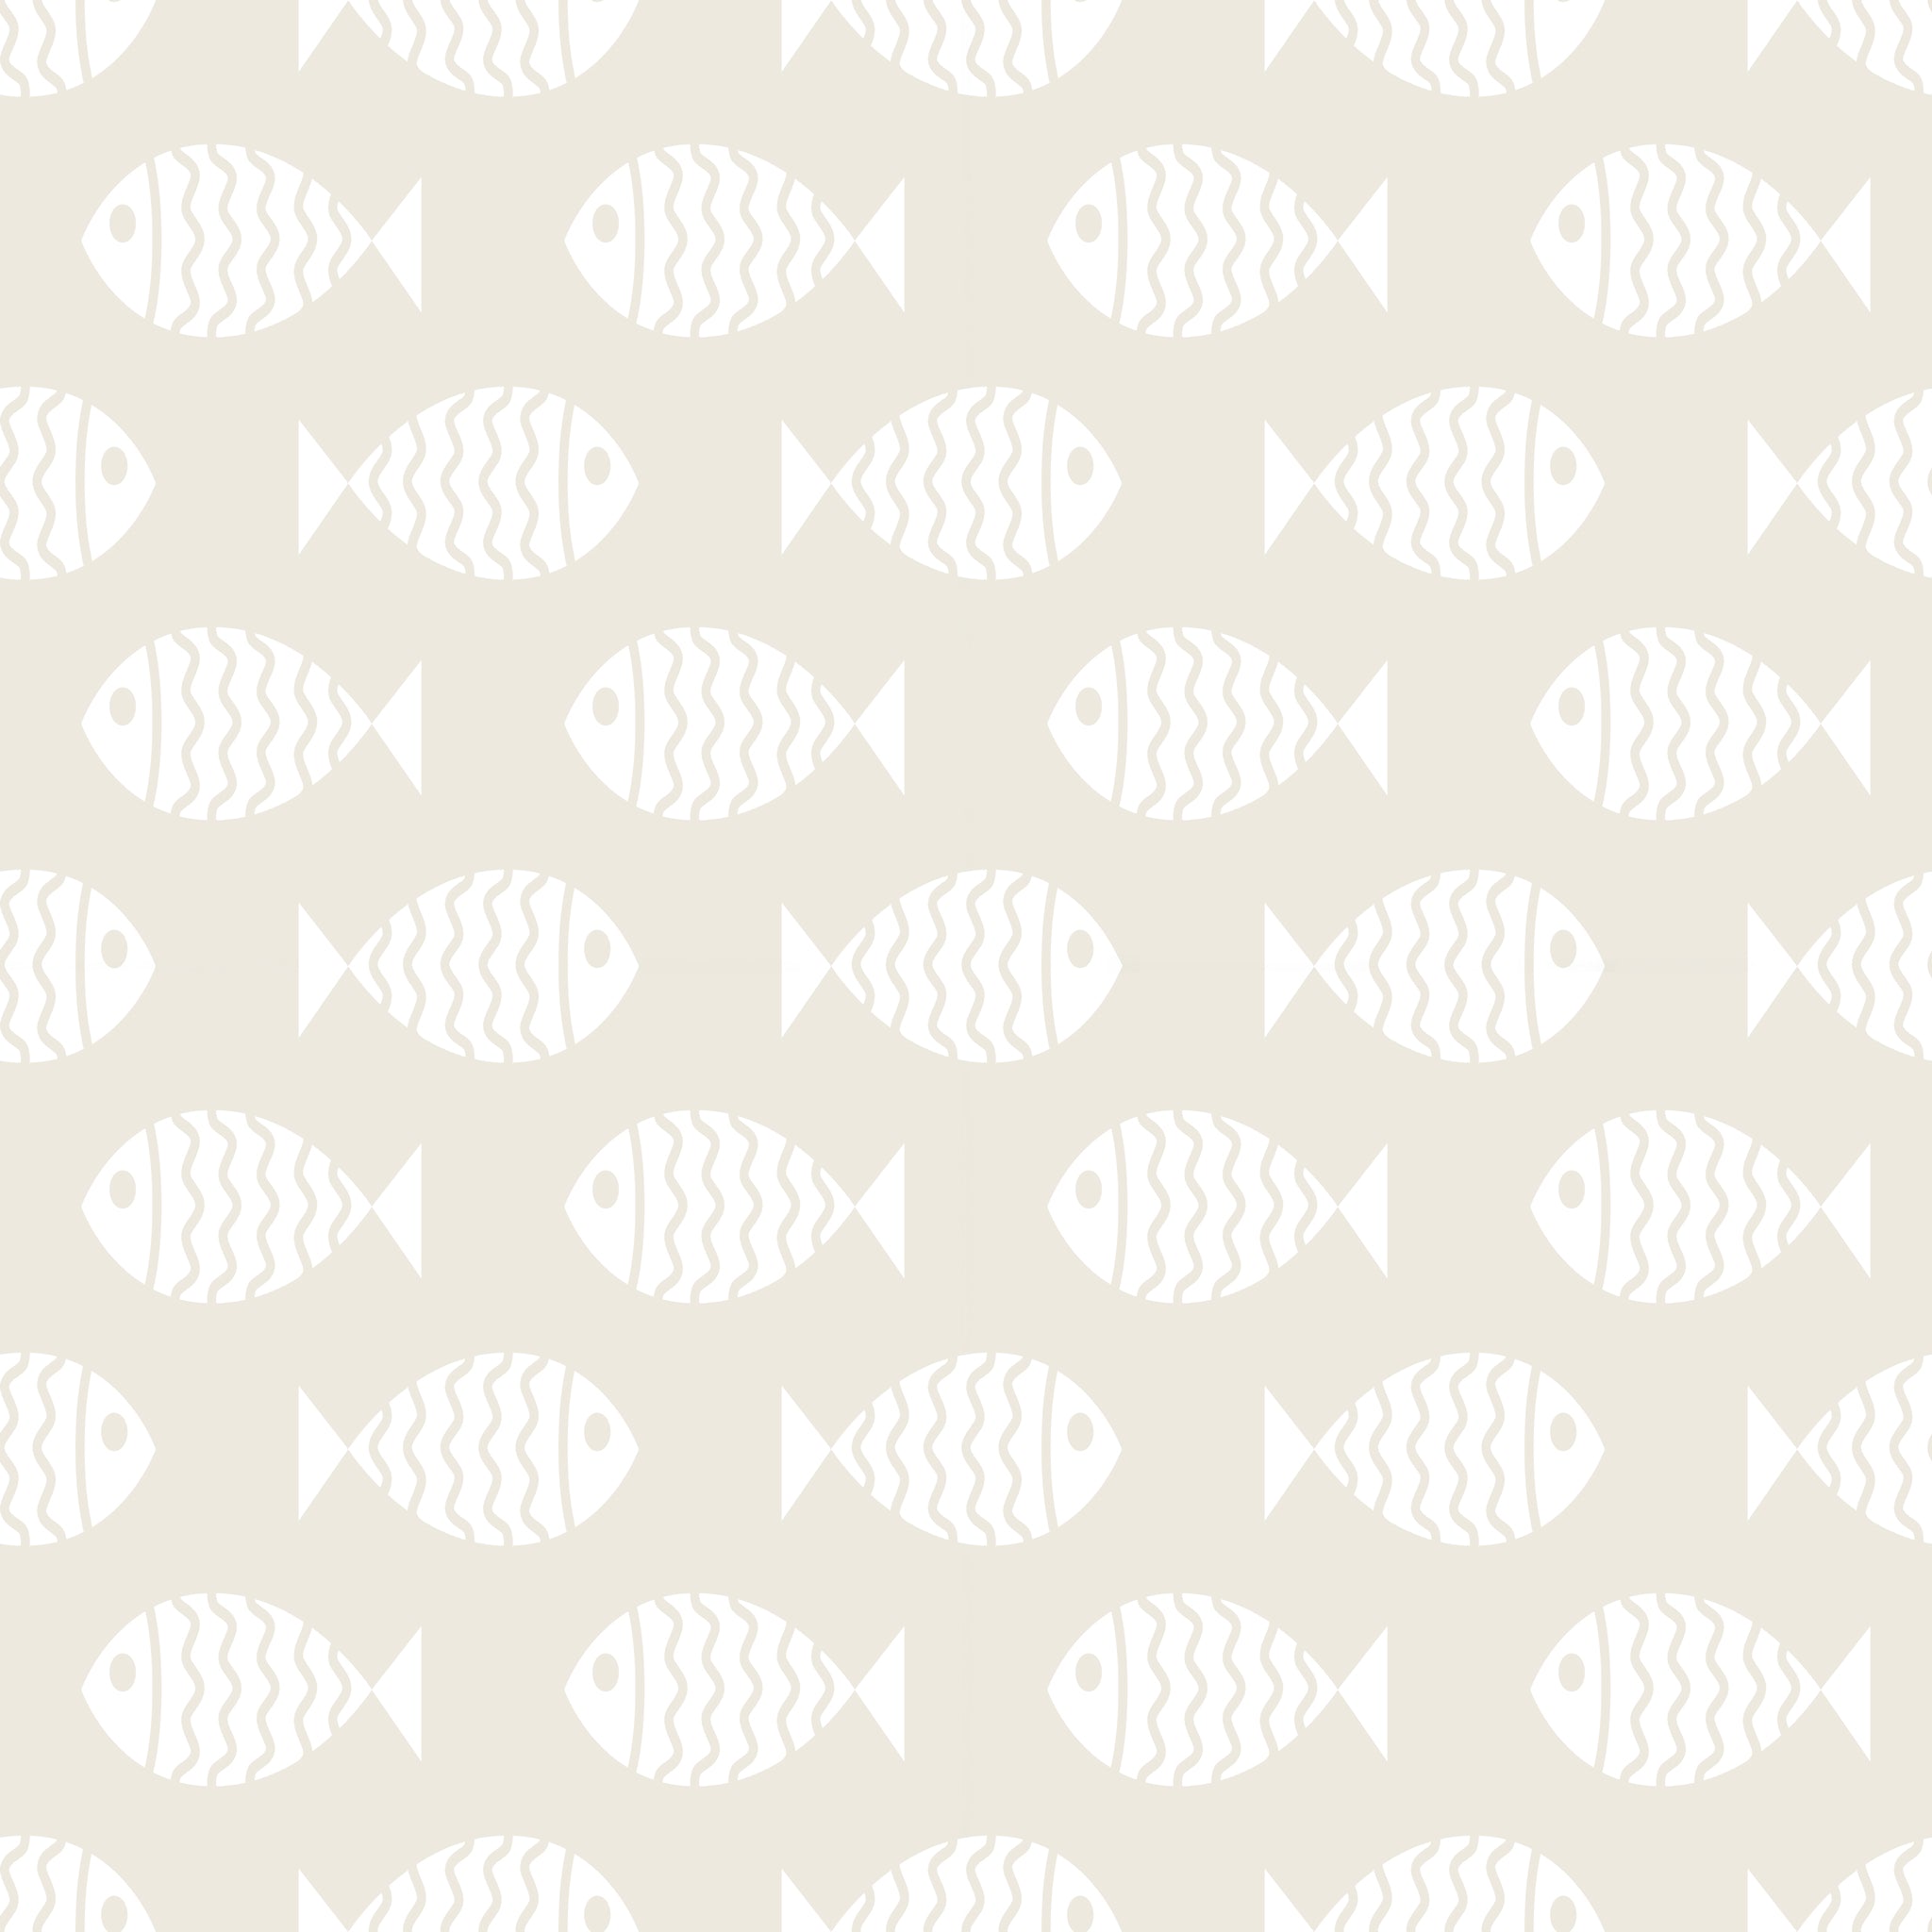 "Keep Swimming Wallpaper by Wall Blush in a stylish bathroom, featuring a pattern of white fish on a beige background."